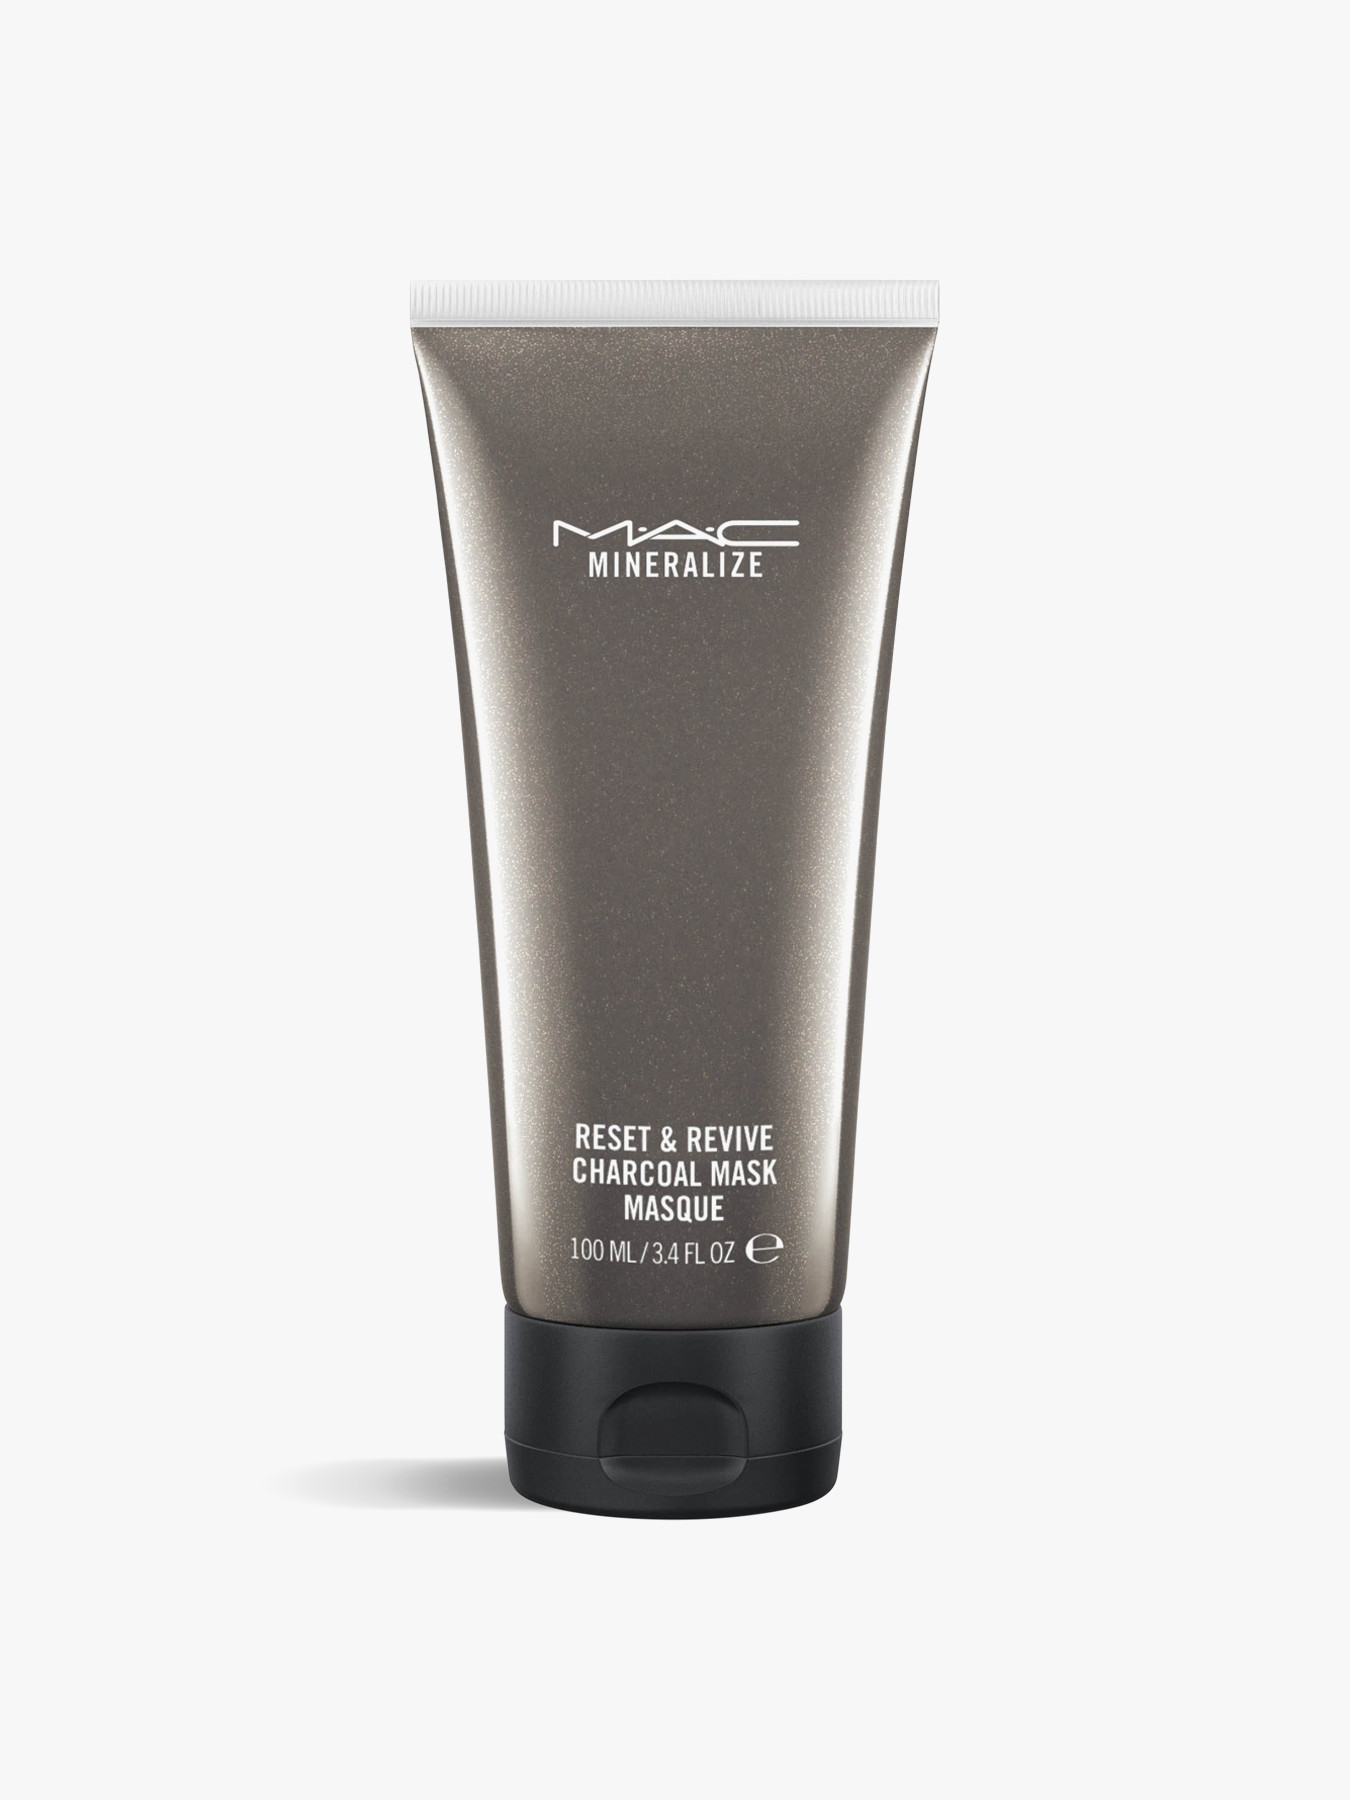 Mac Mineralize Reset & Revive Charcoal Mask